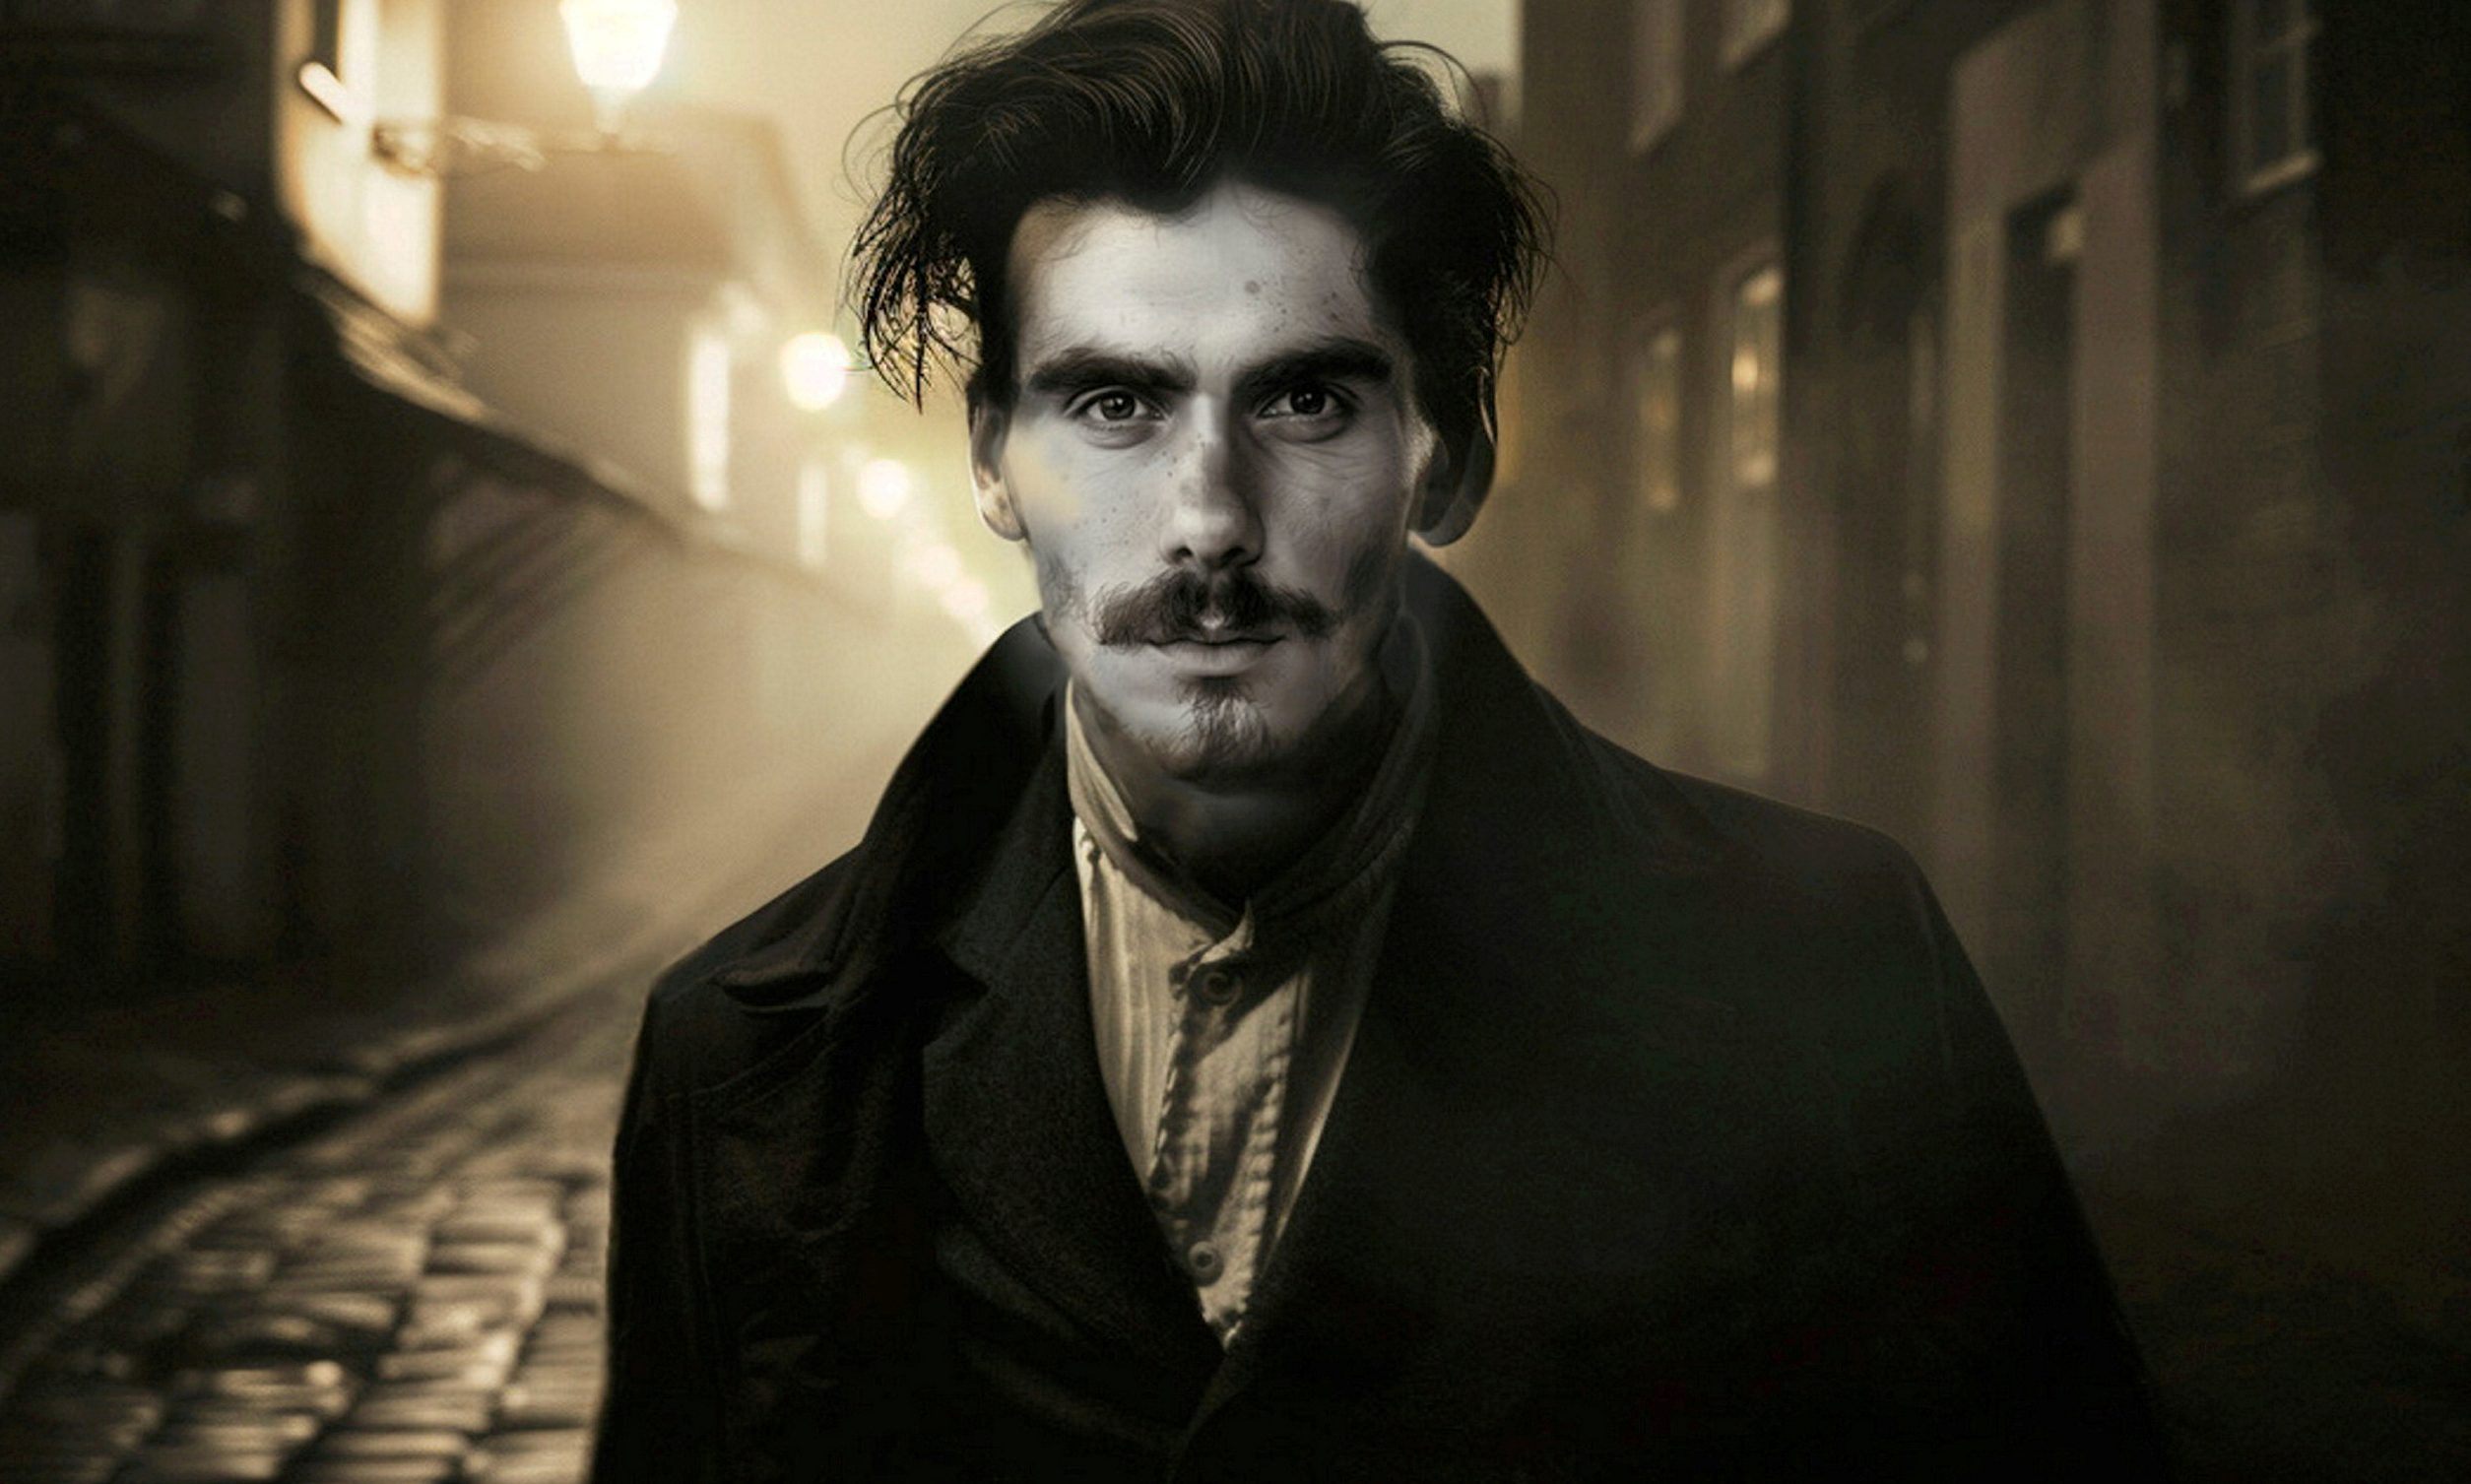 A portrait of a man with mustache and beard, suspected to be Jack the Ripper, created by AI using a photo of Aaron Kosminski as reference.